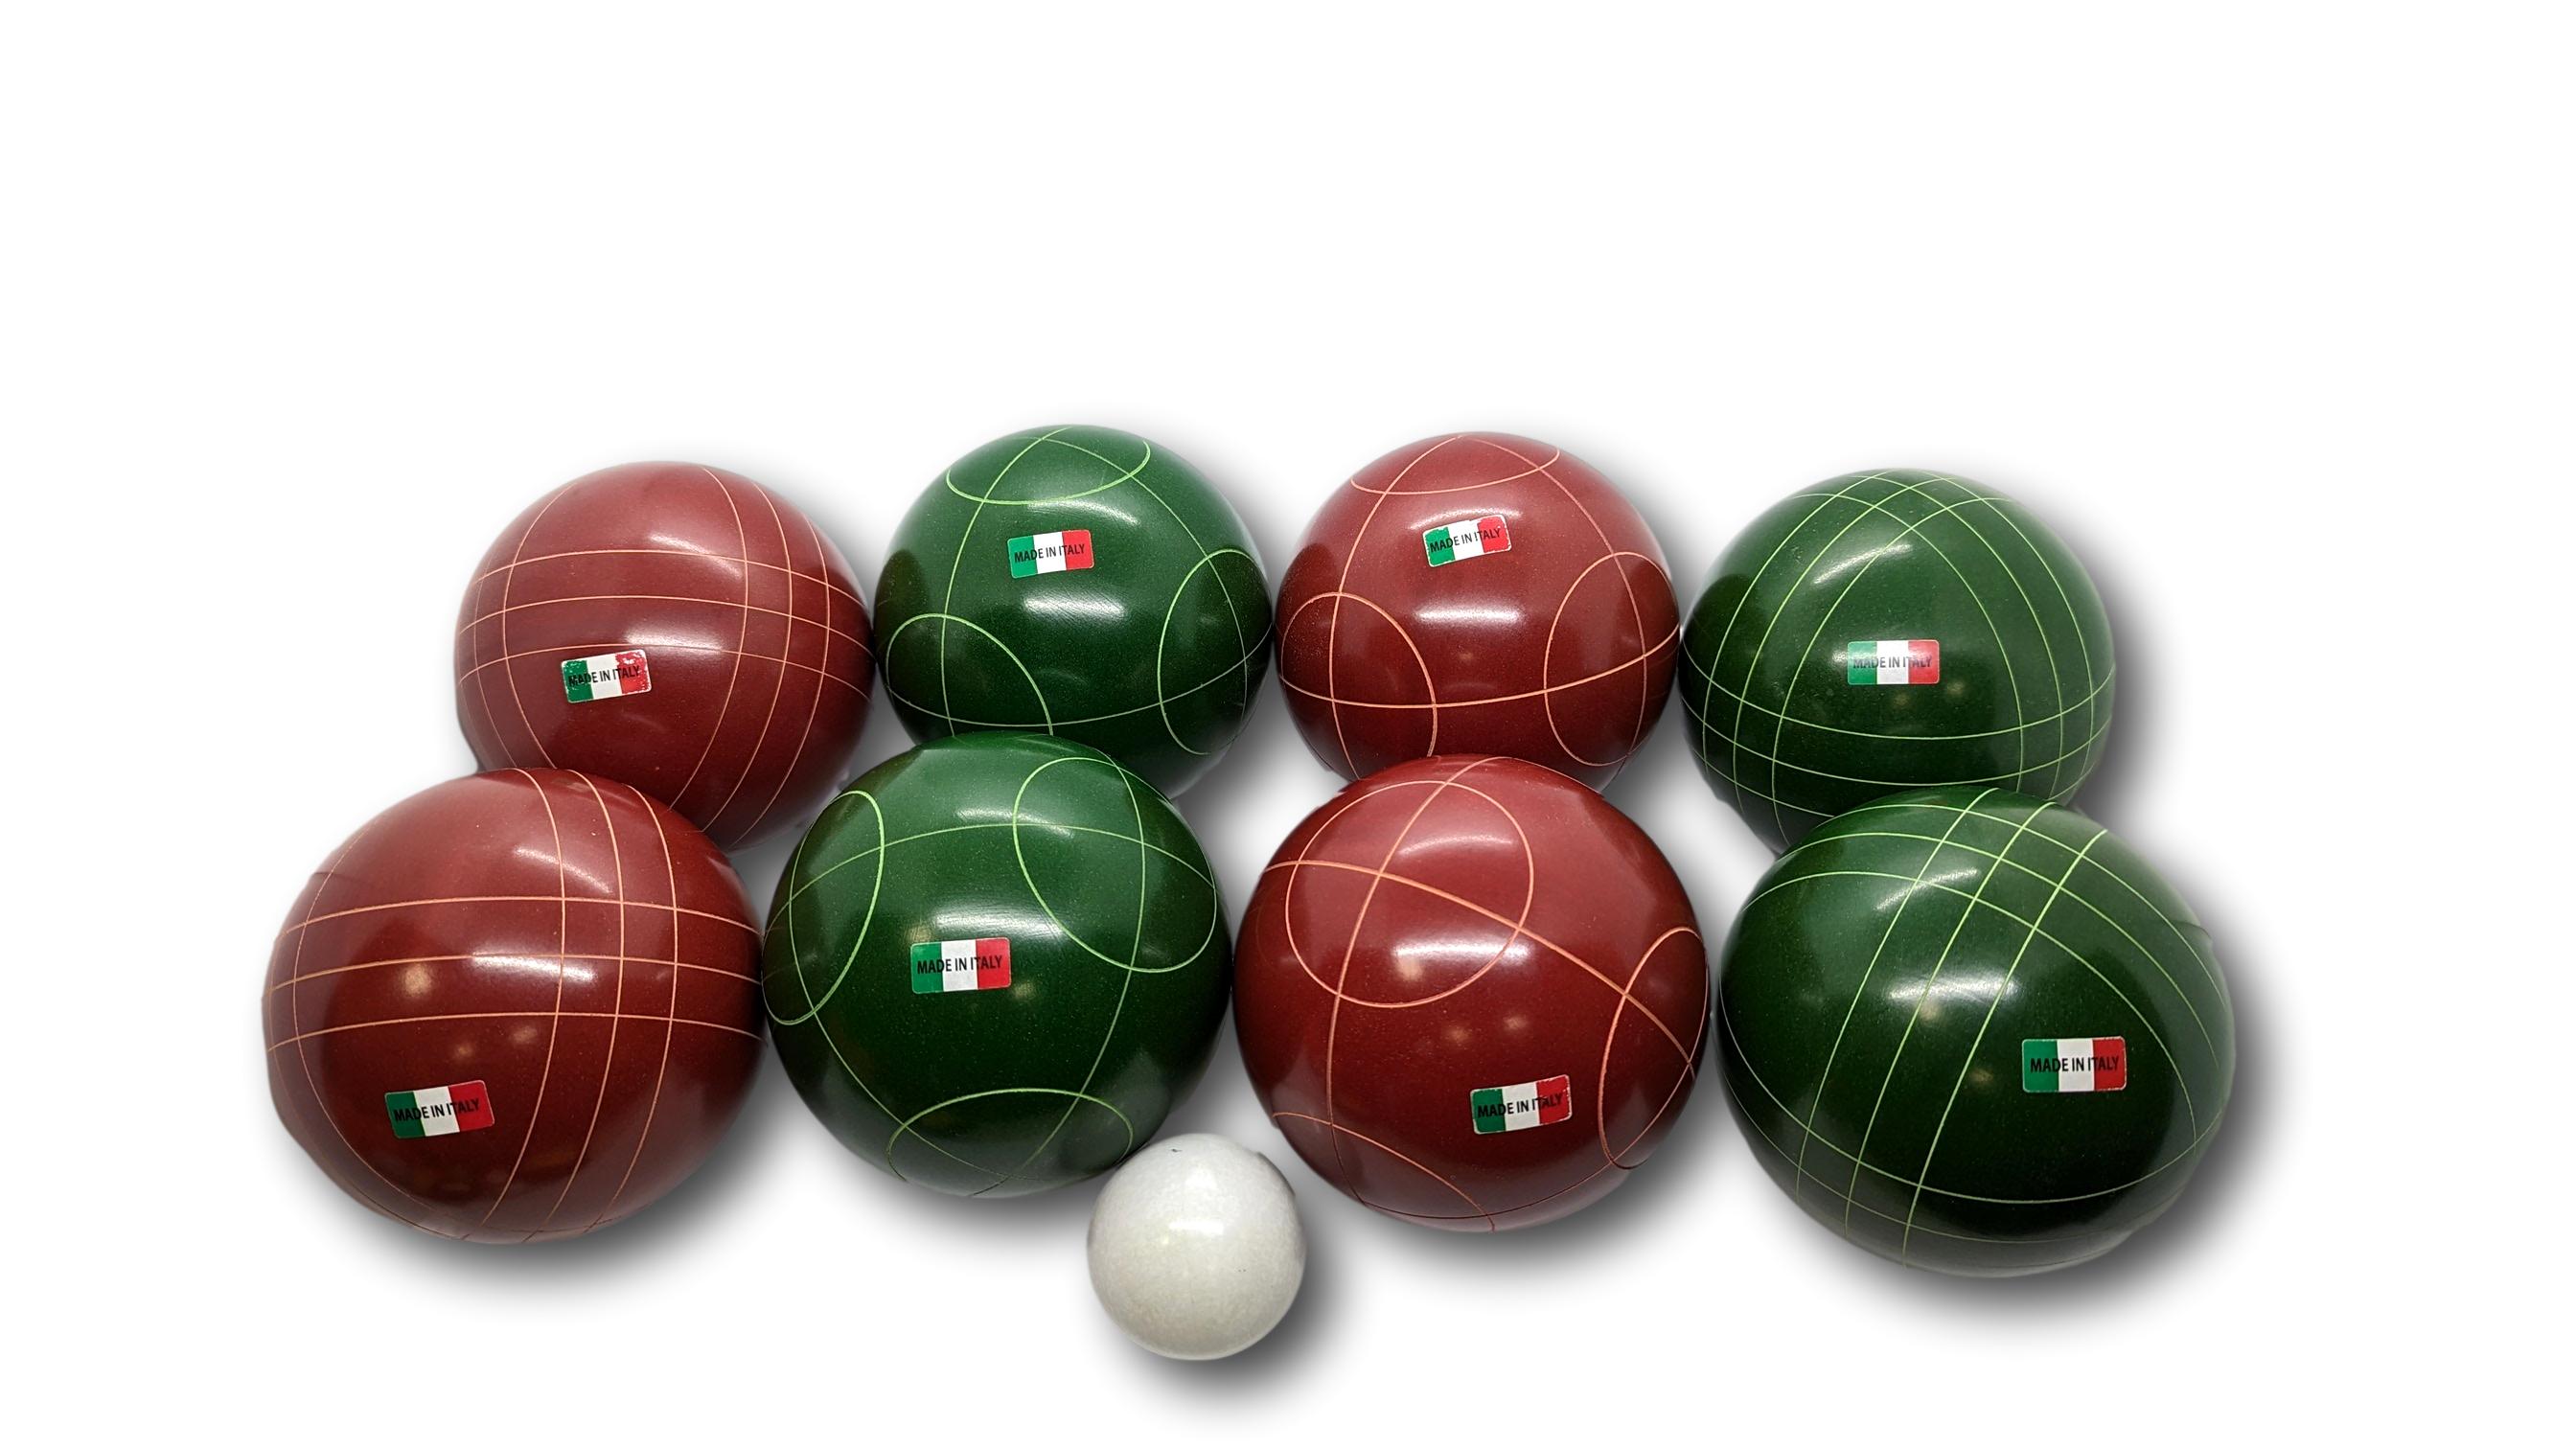 Super Martel Solid Color Bocce Ball Set 107mm Made in Italy - Playaboule